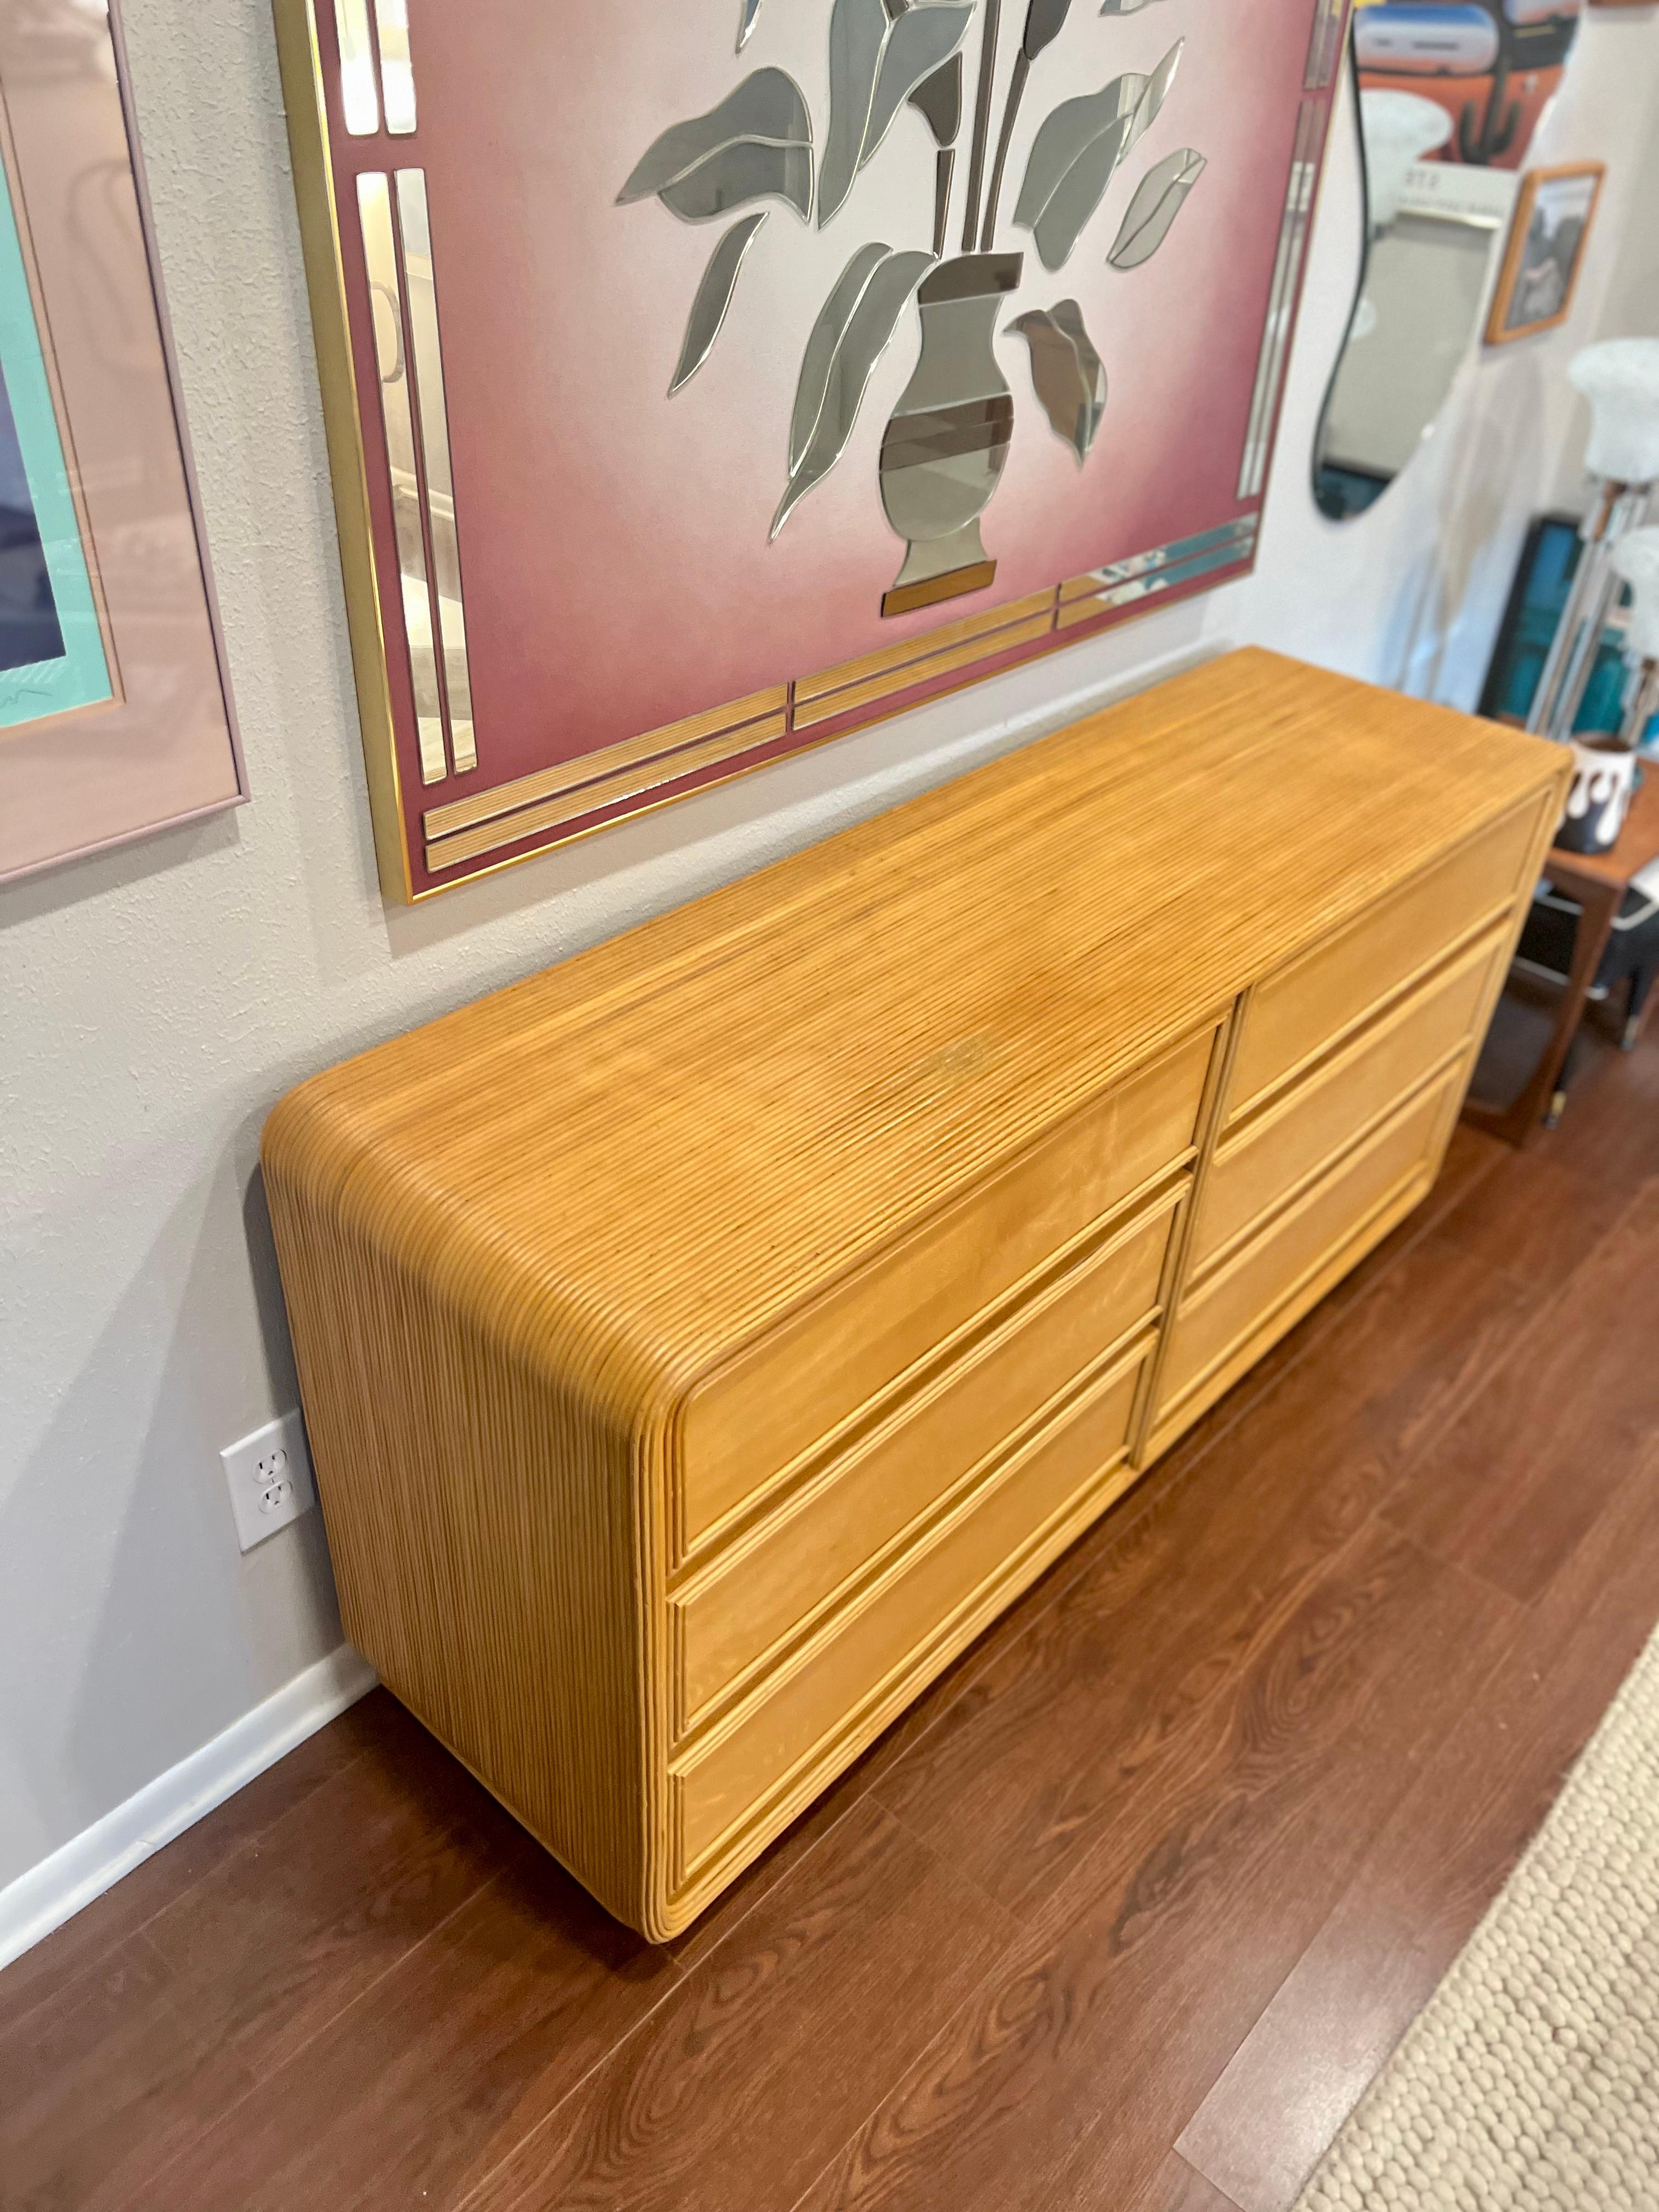 Bamboo Vintage Mid-Century Modern 6 Drawer Pencil Reed Dresser Gabriella Crespi Style For Sale